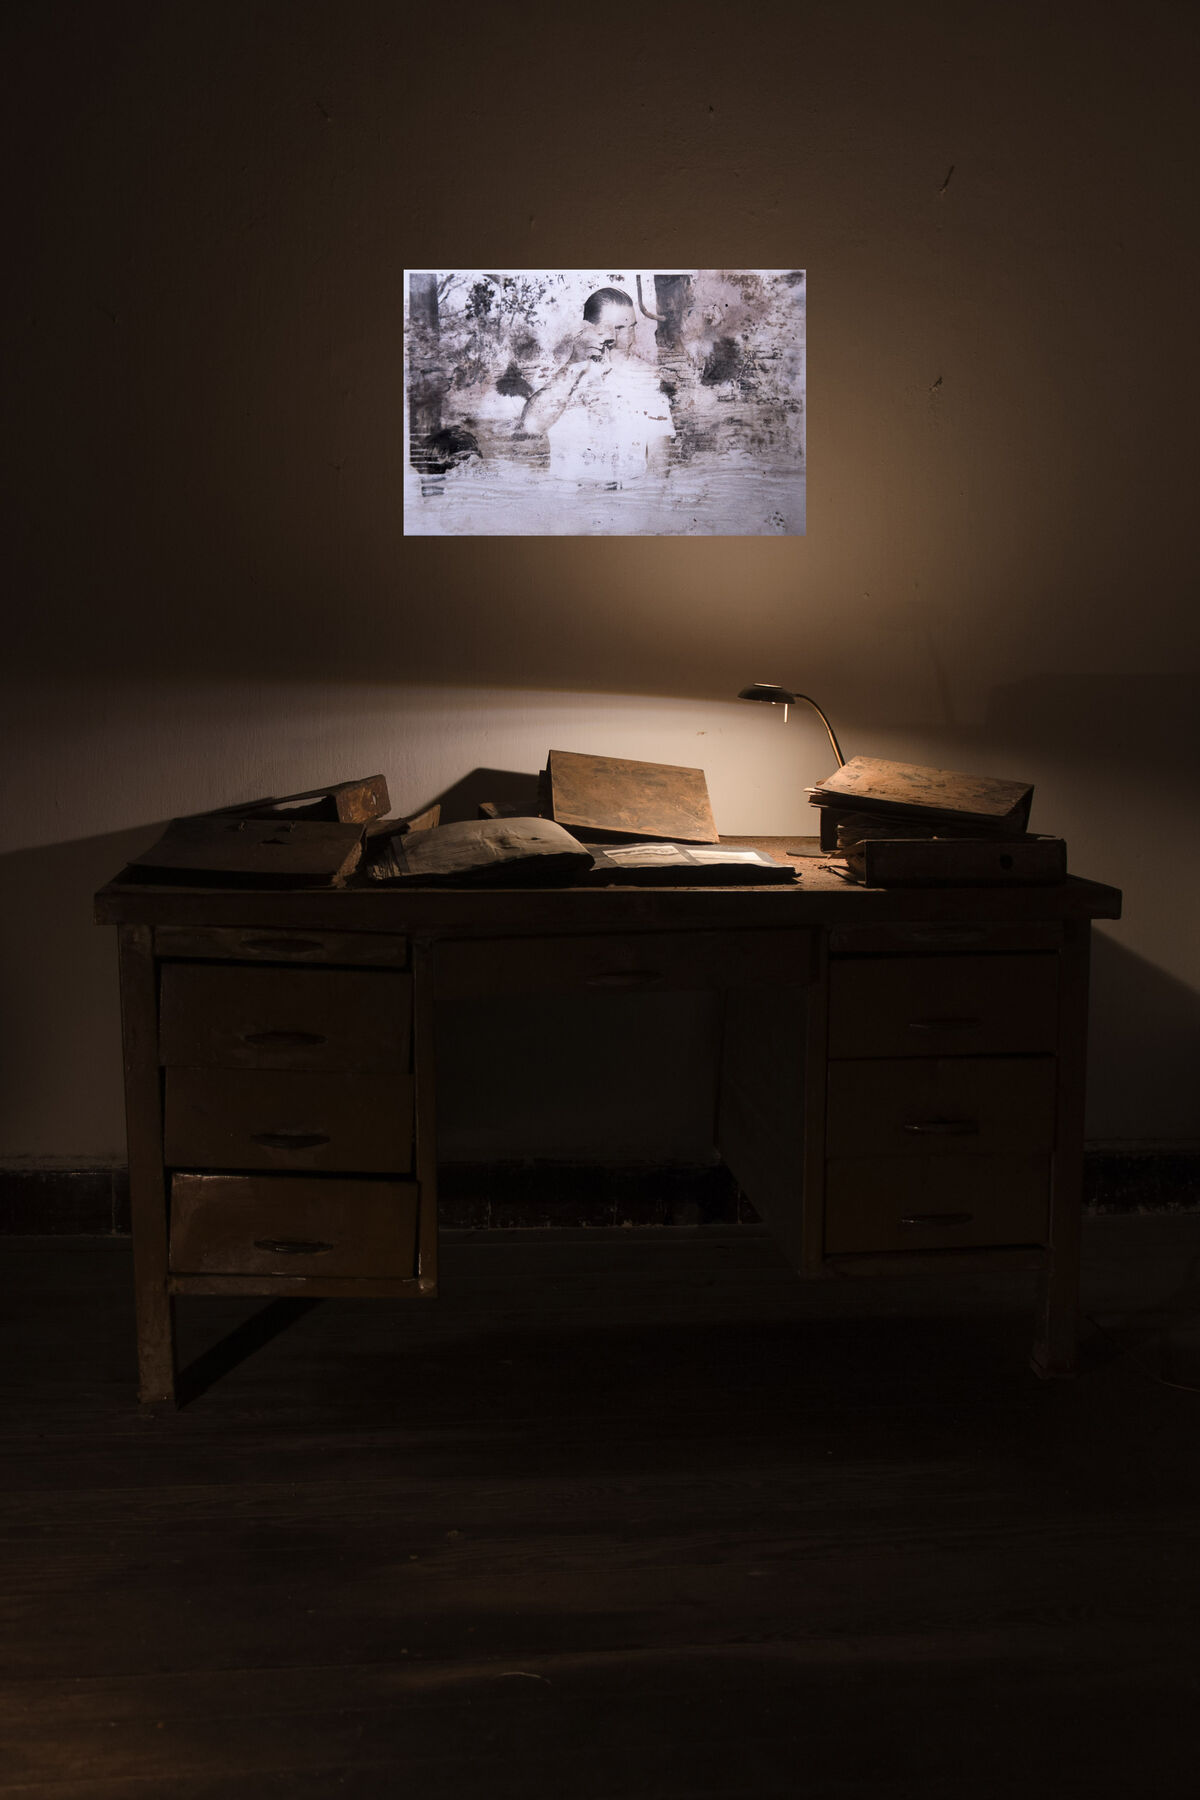 A desk with books, being lit by a lightly dimmed lamp with a black and white photograph being projected on the wall